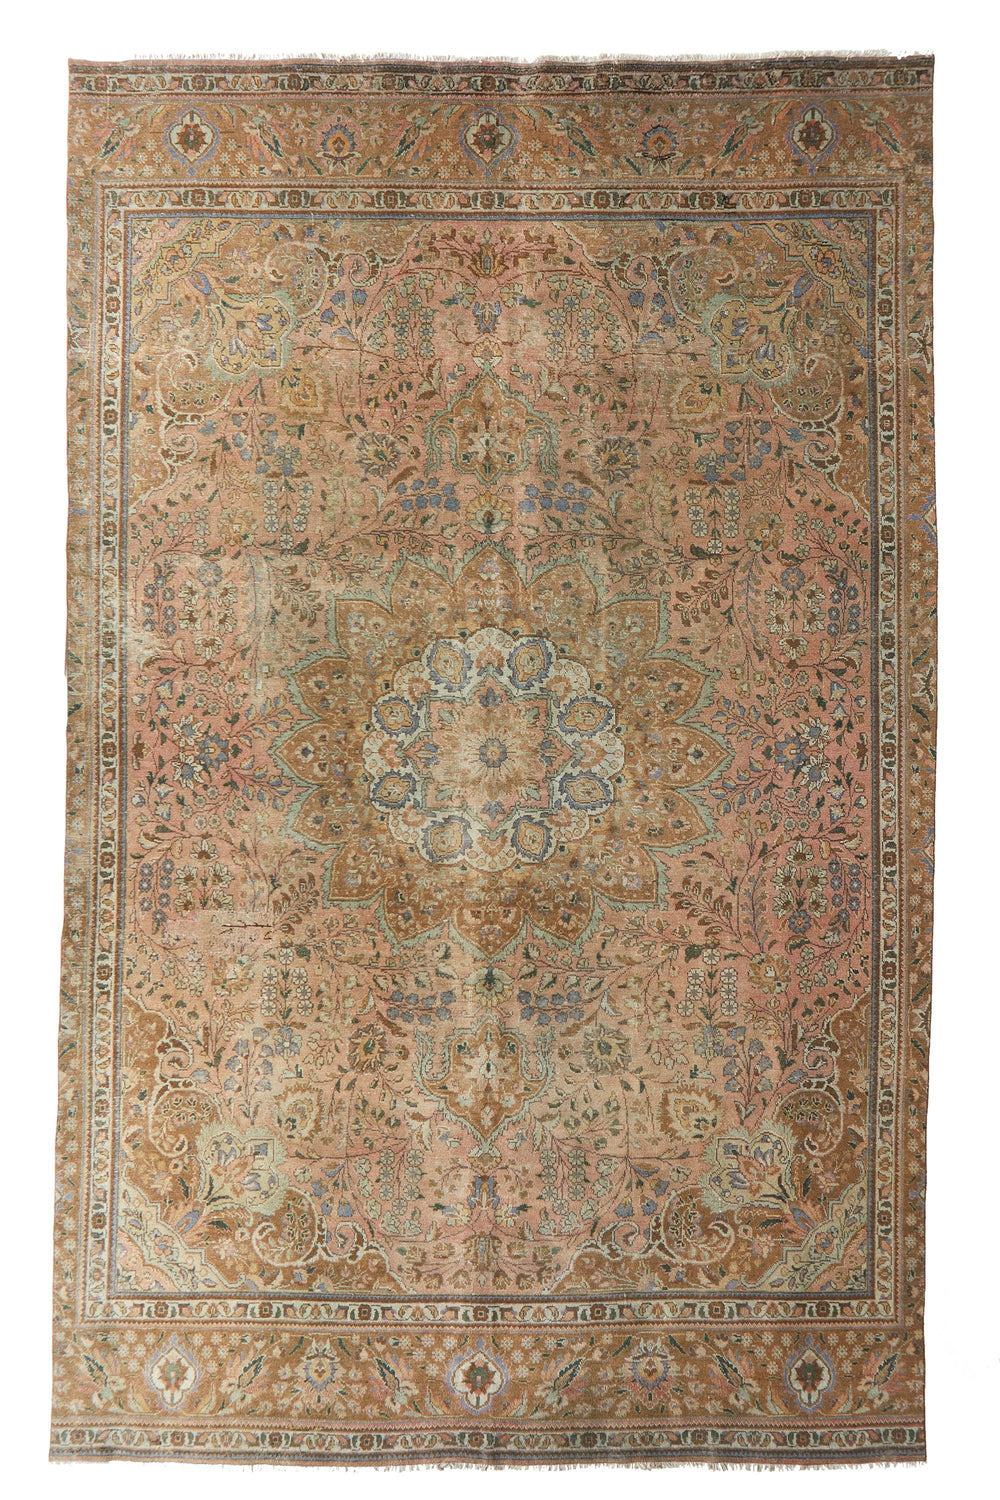 'Garden Party' Large Vintage Area Rug - 8' x 12'8